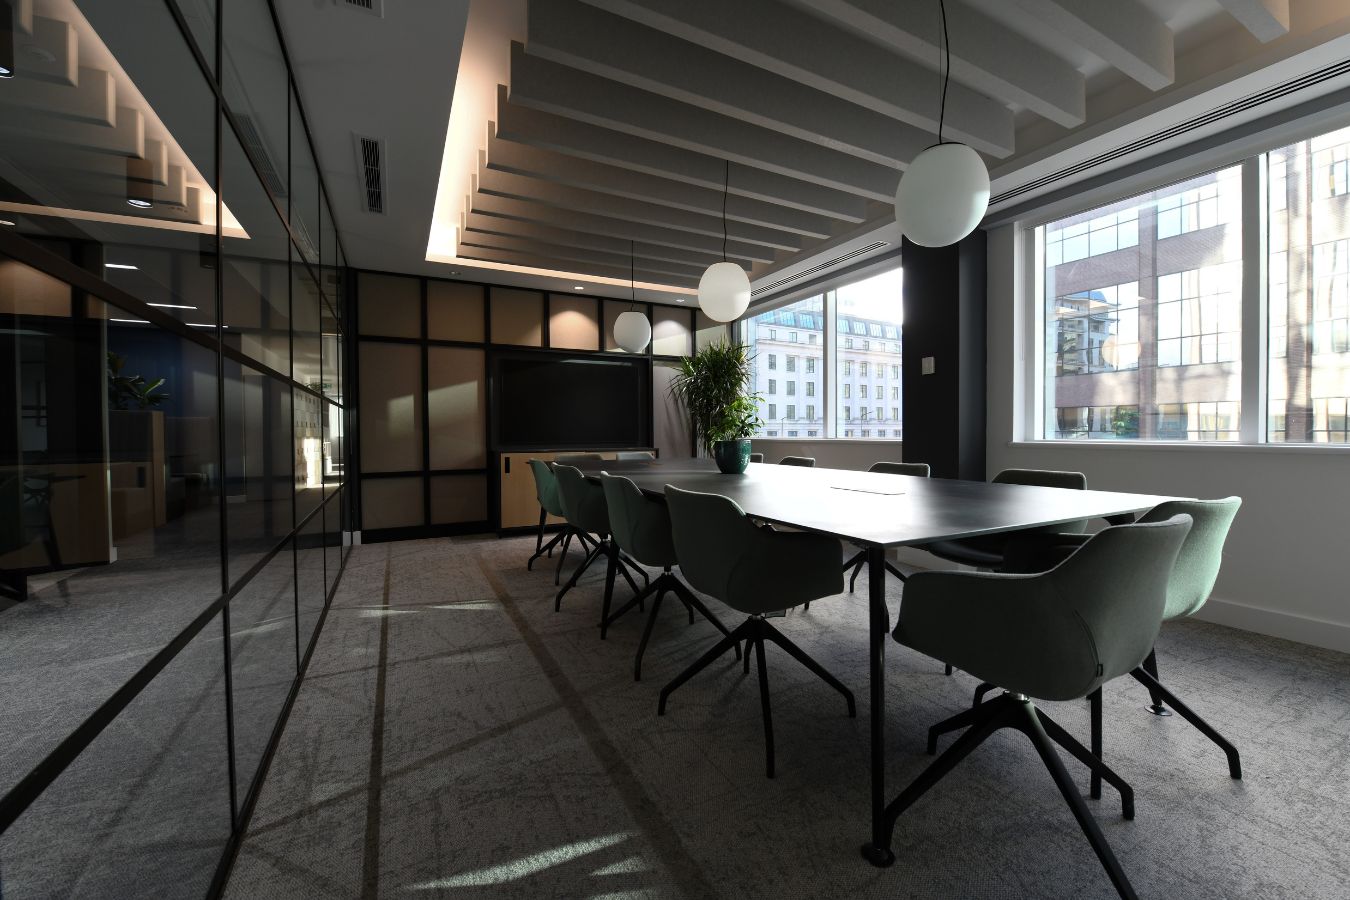 Sleek Microsoft teams/conference room with a large long meeting desk and multiple comfortable chairs